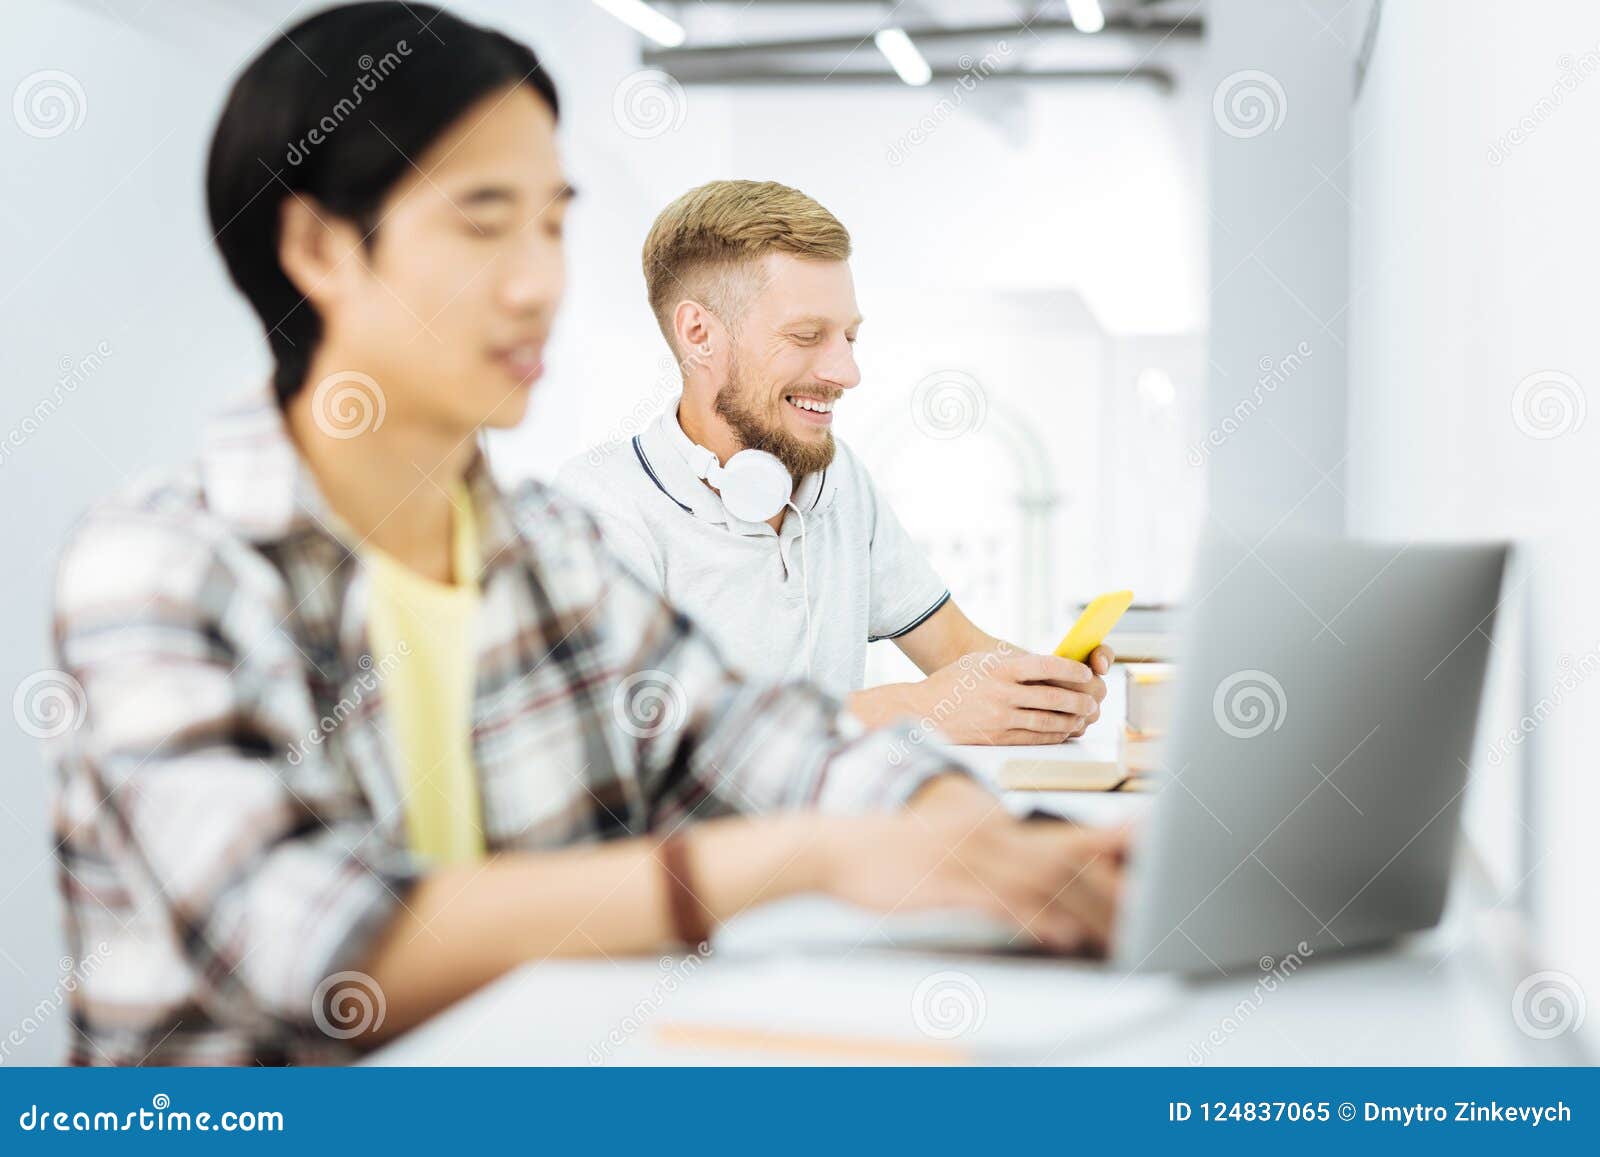 Two Men Sitting At The Desk And Being Occupied With Their Devices